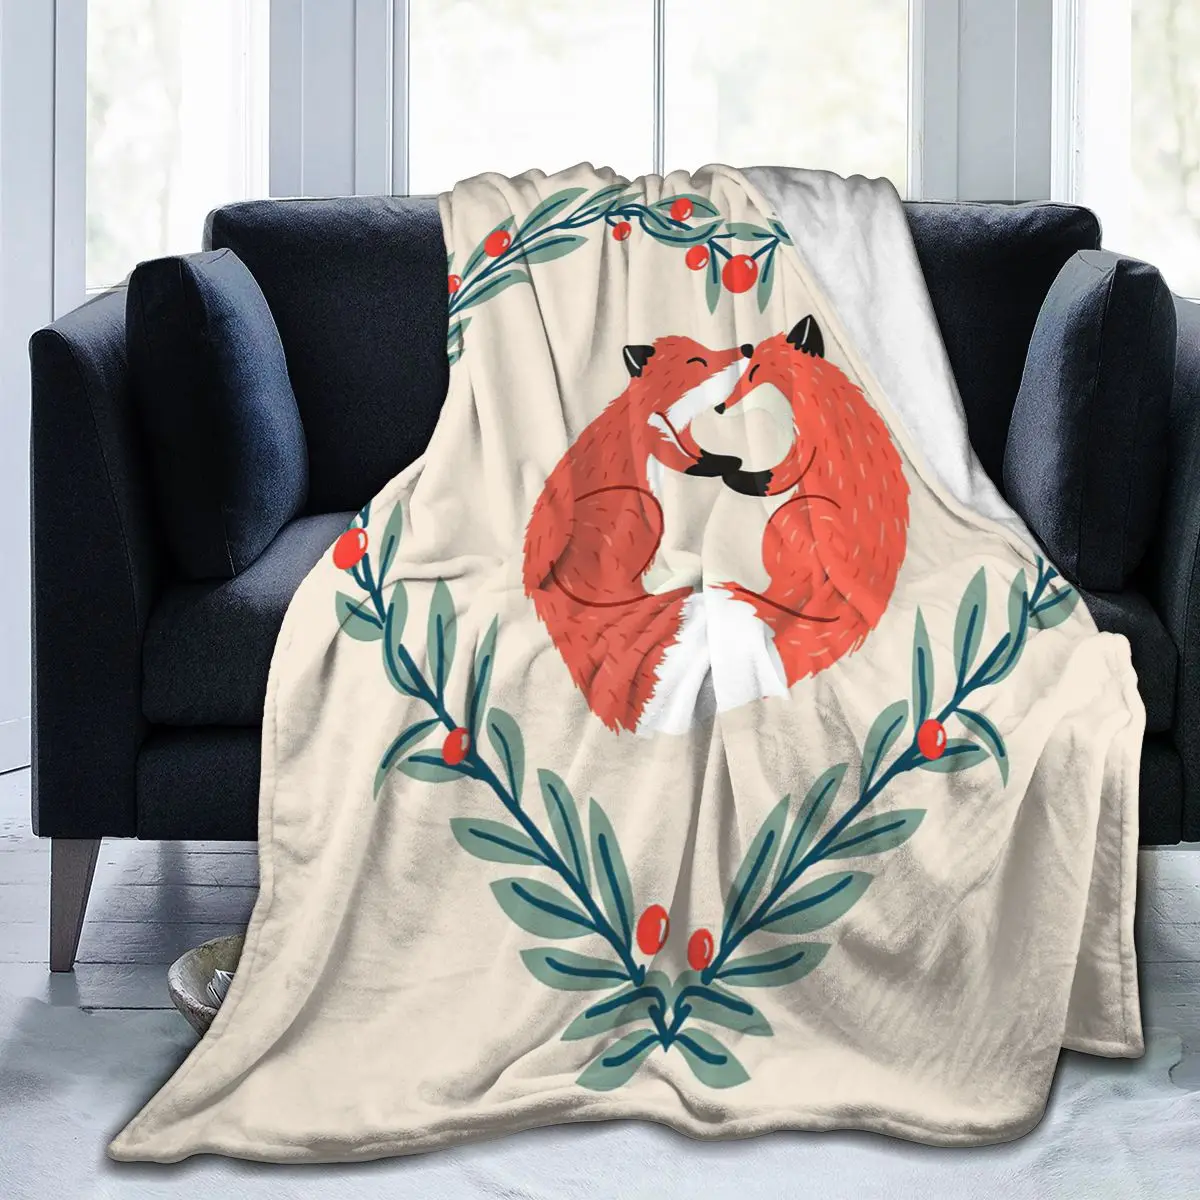 

Super Soft Sofa Blanket Sublimation Cartoon Cartoon Bedding Flannel Played Blanket Bedroom Decor for Children and Adults 11